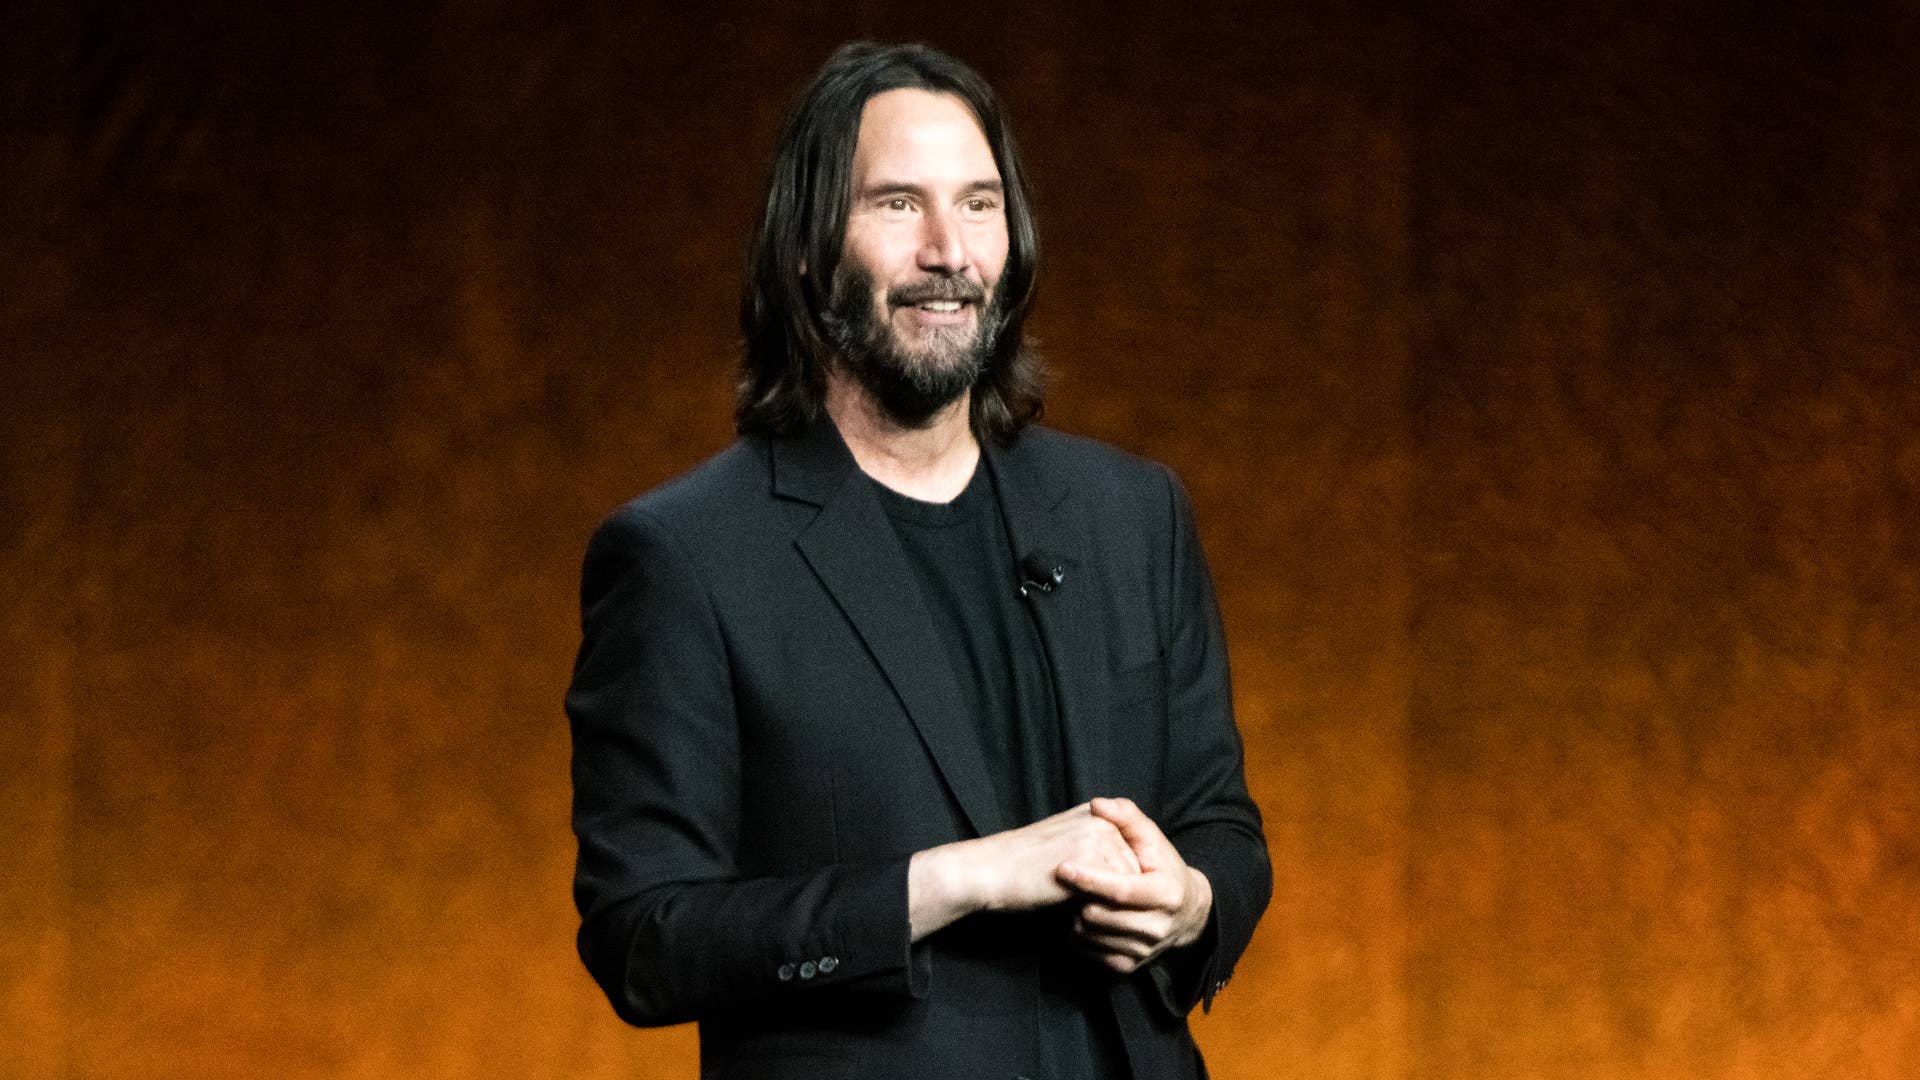 Keanu Reeves's 'John Wick: Chapter 4' Moved to March 2023